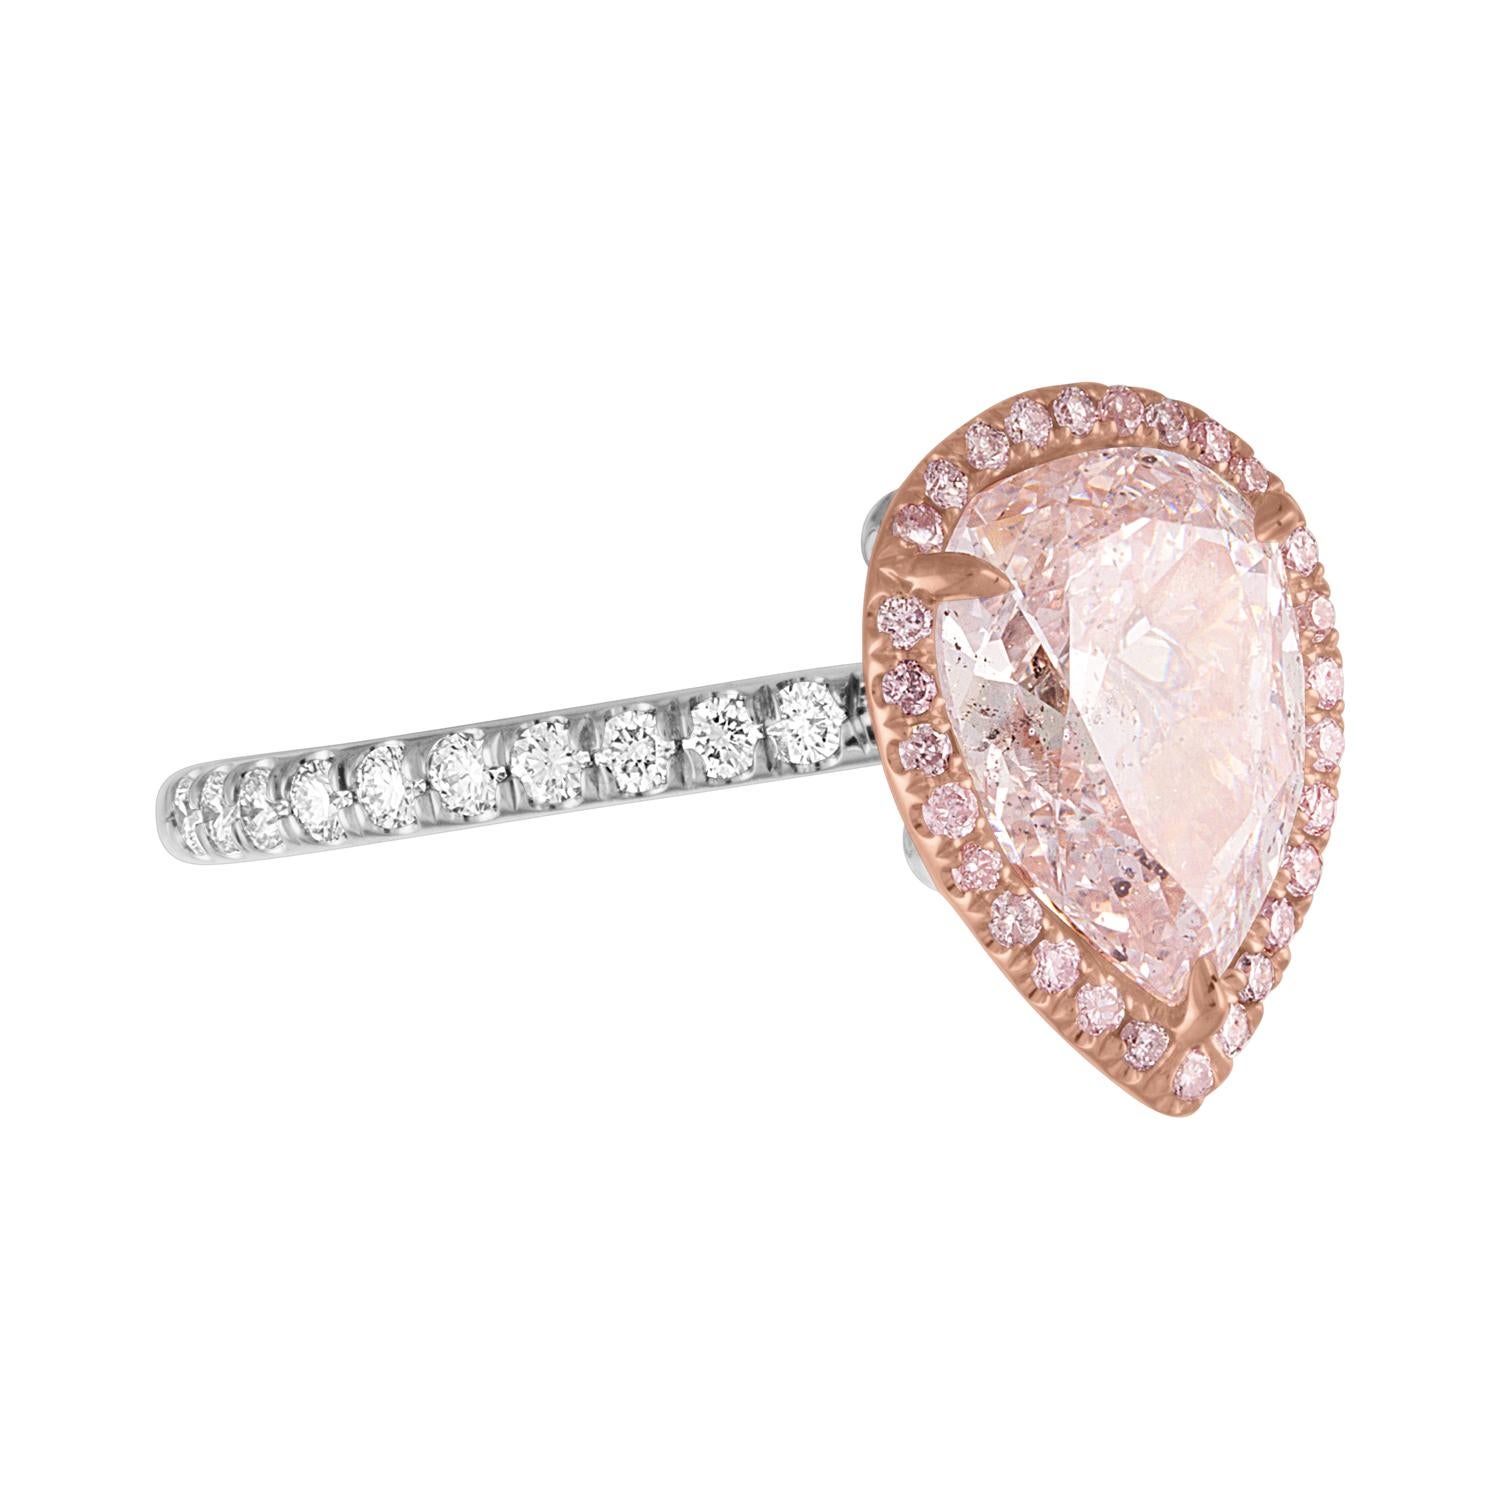 2.56 Carat Pear Shape is set in Two tone hand Crafted Mounting, Rose Gold & Platinum.
The Pear Shape is set in the center surrounding Pink Diamonds Pave' setting. The Shank is also dressed in White with White Diamonds on it.
The Pear Shape is GIA